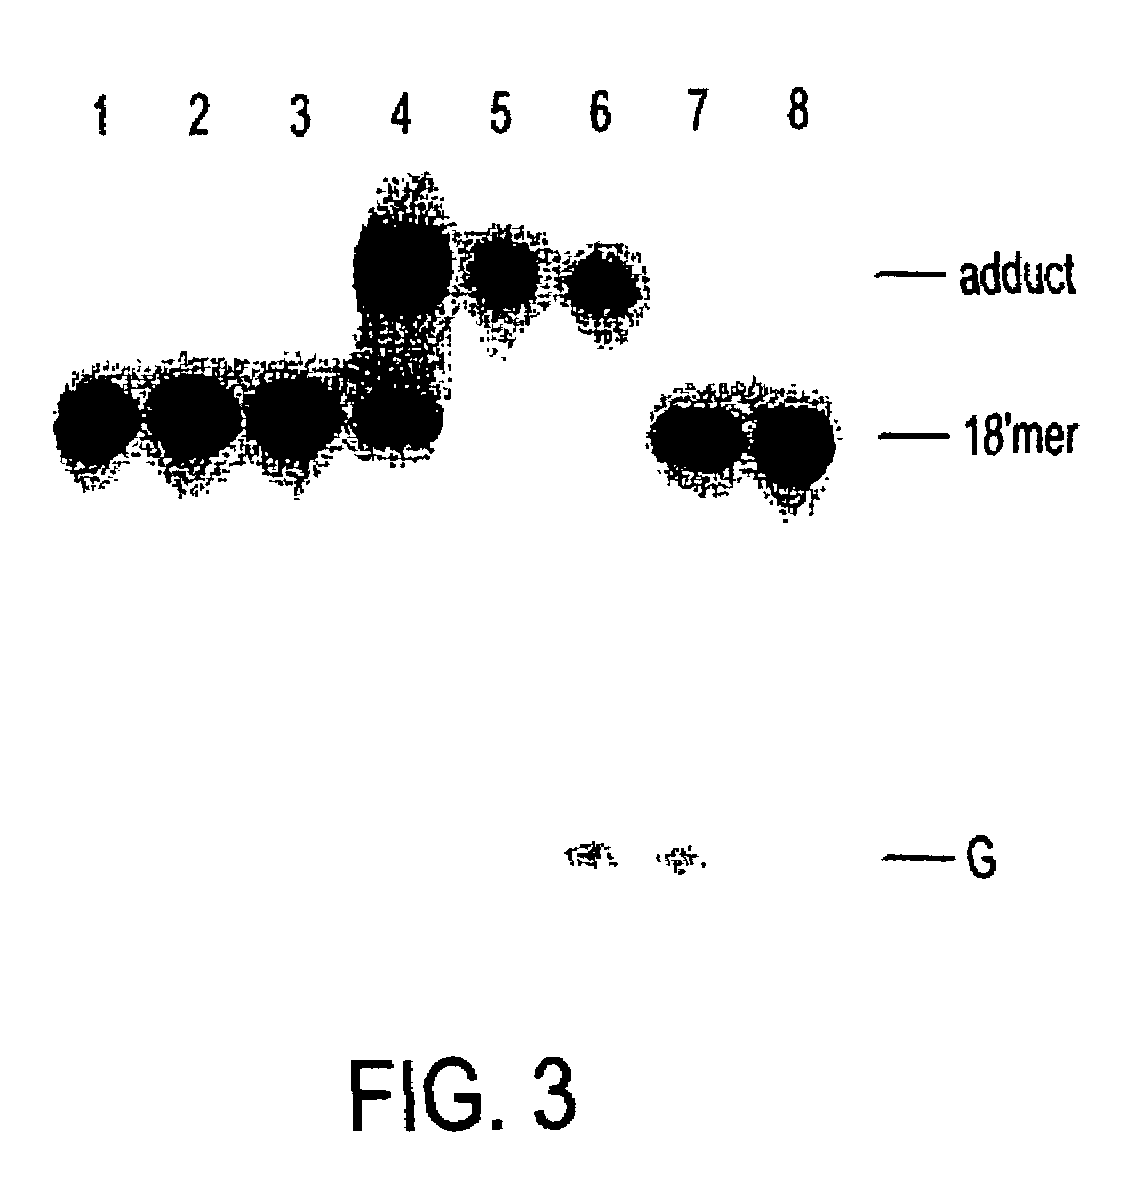 Nickel-based reagents for detecting DNA and DNA-protein contacts